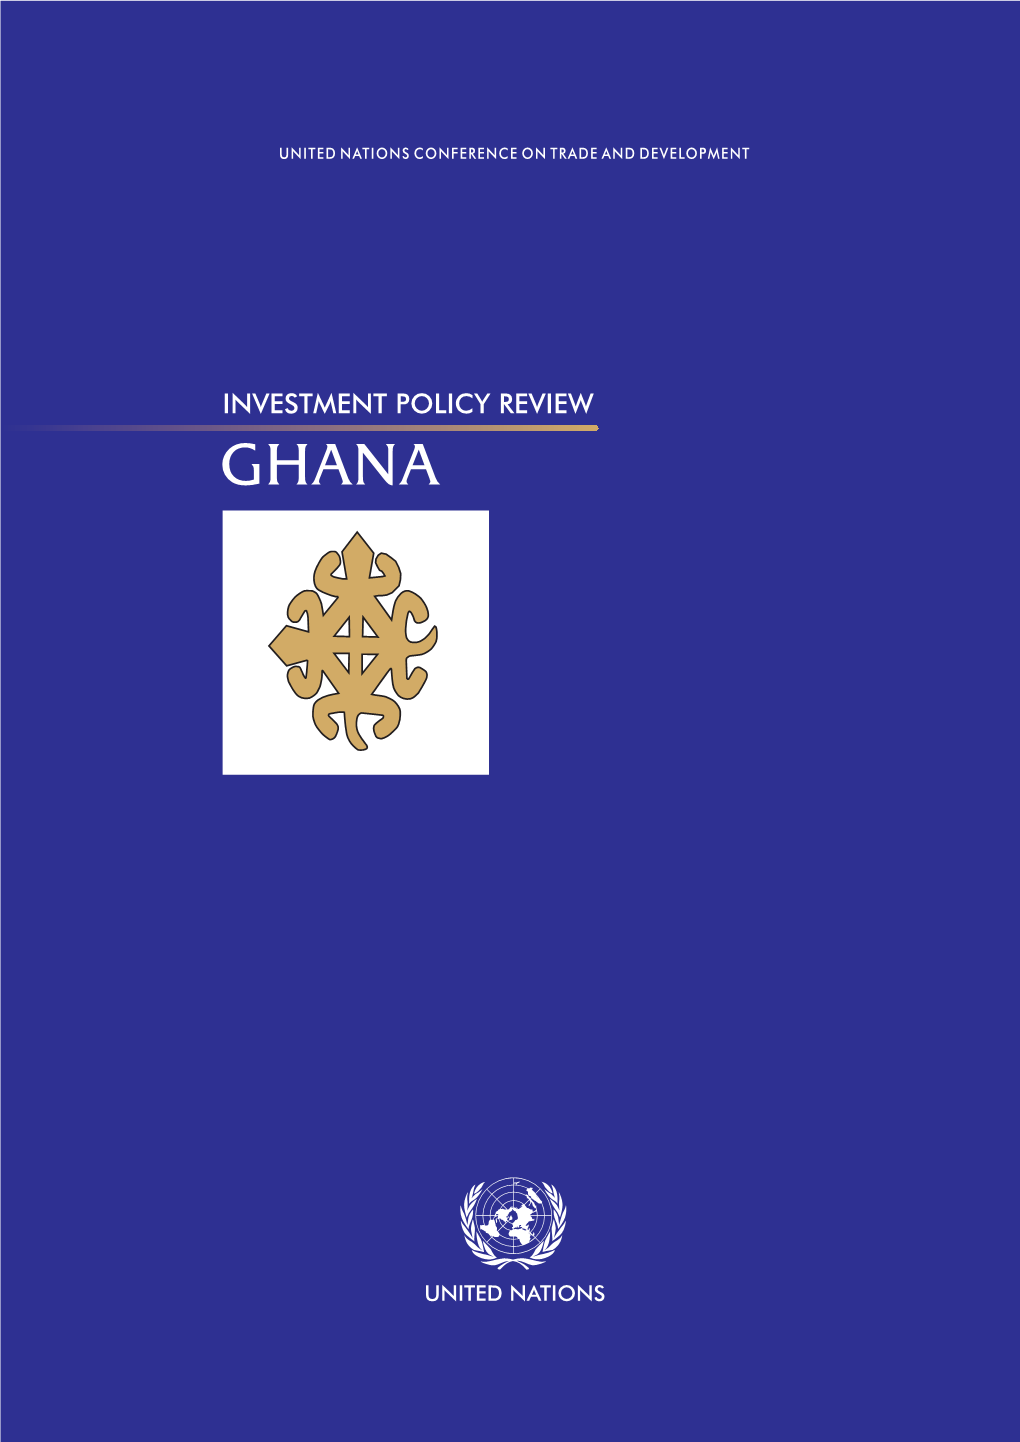 Investment Policy Review of Ghana Was Initiated at the Request of That Country’S Ministry of Foreign Affairs and the Ghana Investment Promotion Centre (GIPC)